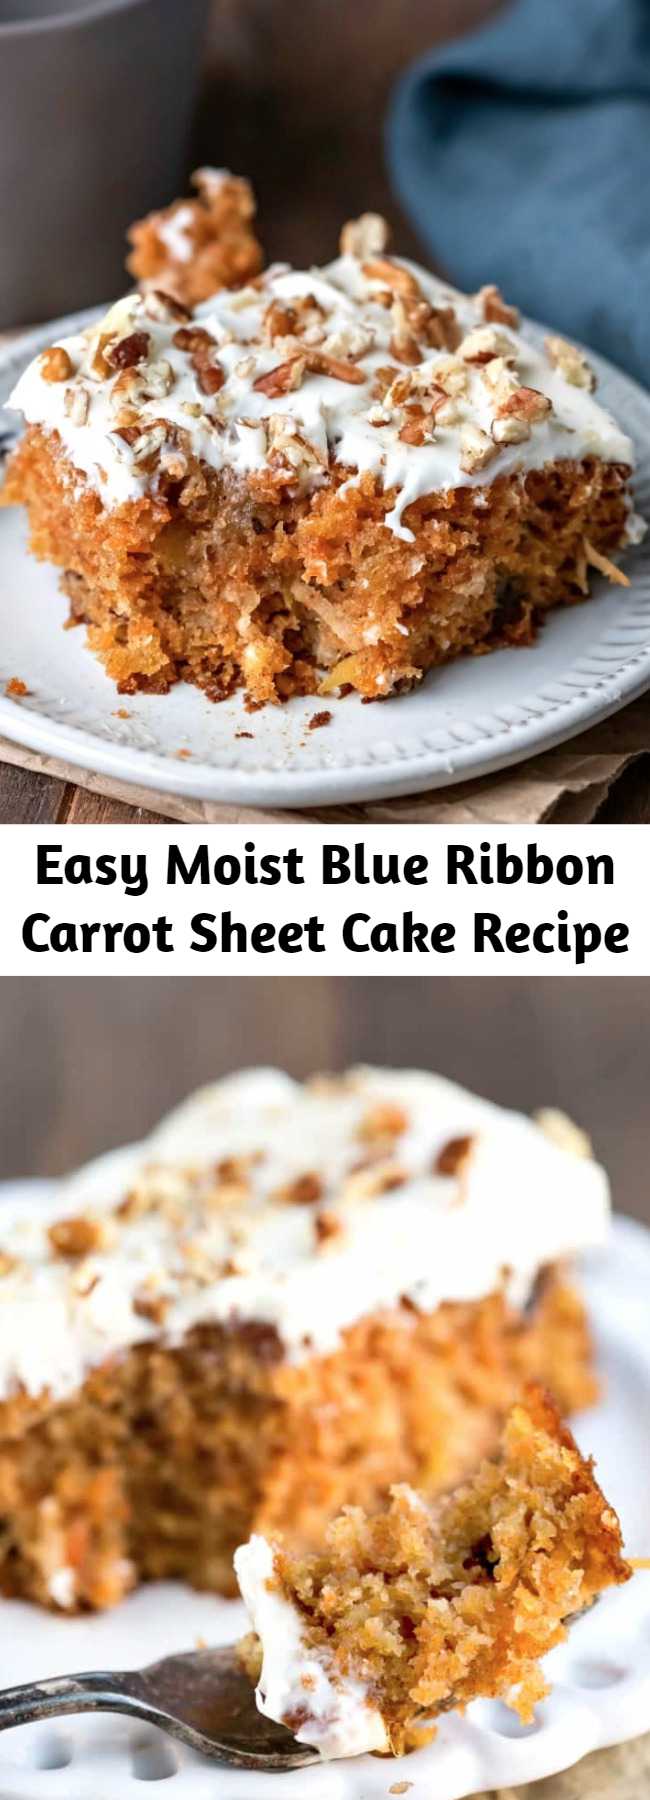 Easy Moist Blue Ribbon Carrot Sheet Cake Recipe - Moist Blue Ribbon Carrot Sheet Cake Recipe - Vegetarian · Best carrot cake recipe! Super moist, super delicious. Blue Ribbon Carrot Sheet Cake is a moist carrot sheet cake recipe that's topped with both a buttermilk glaze and rich cream cheese frosting!